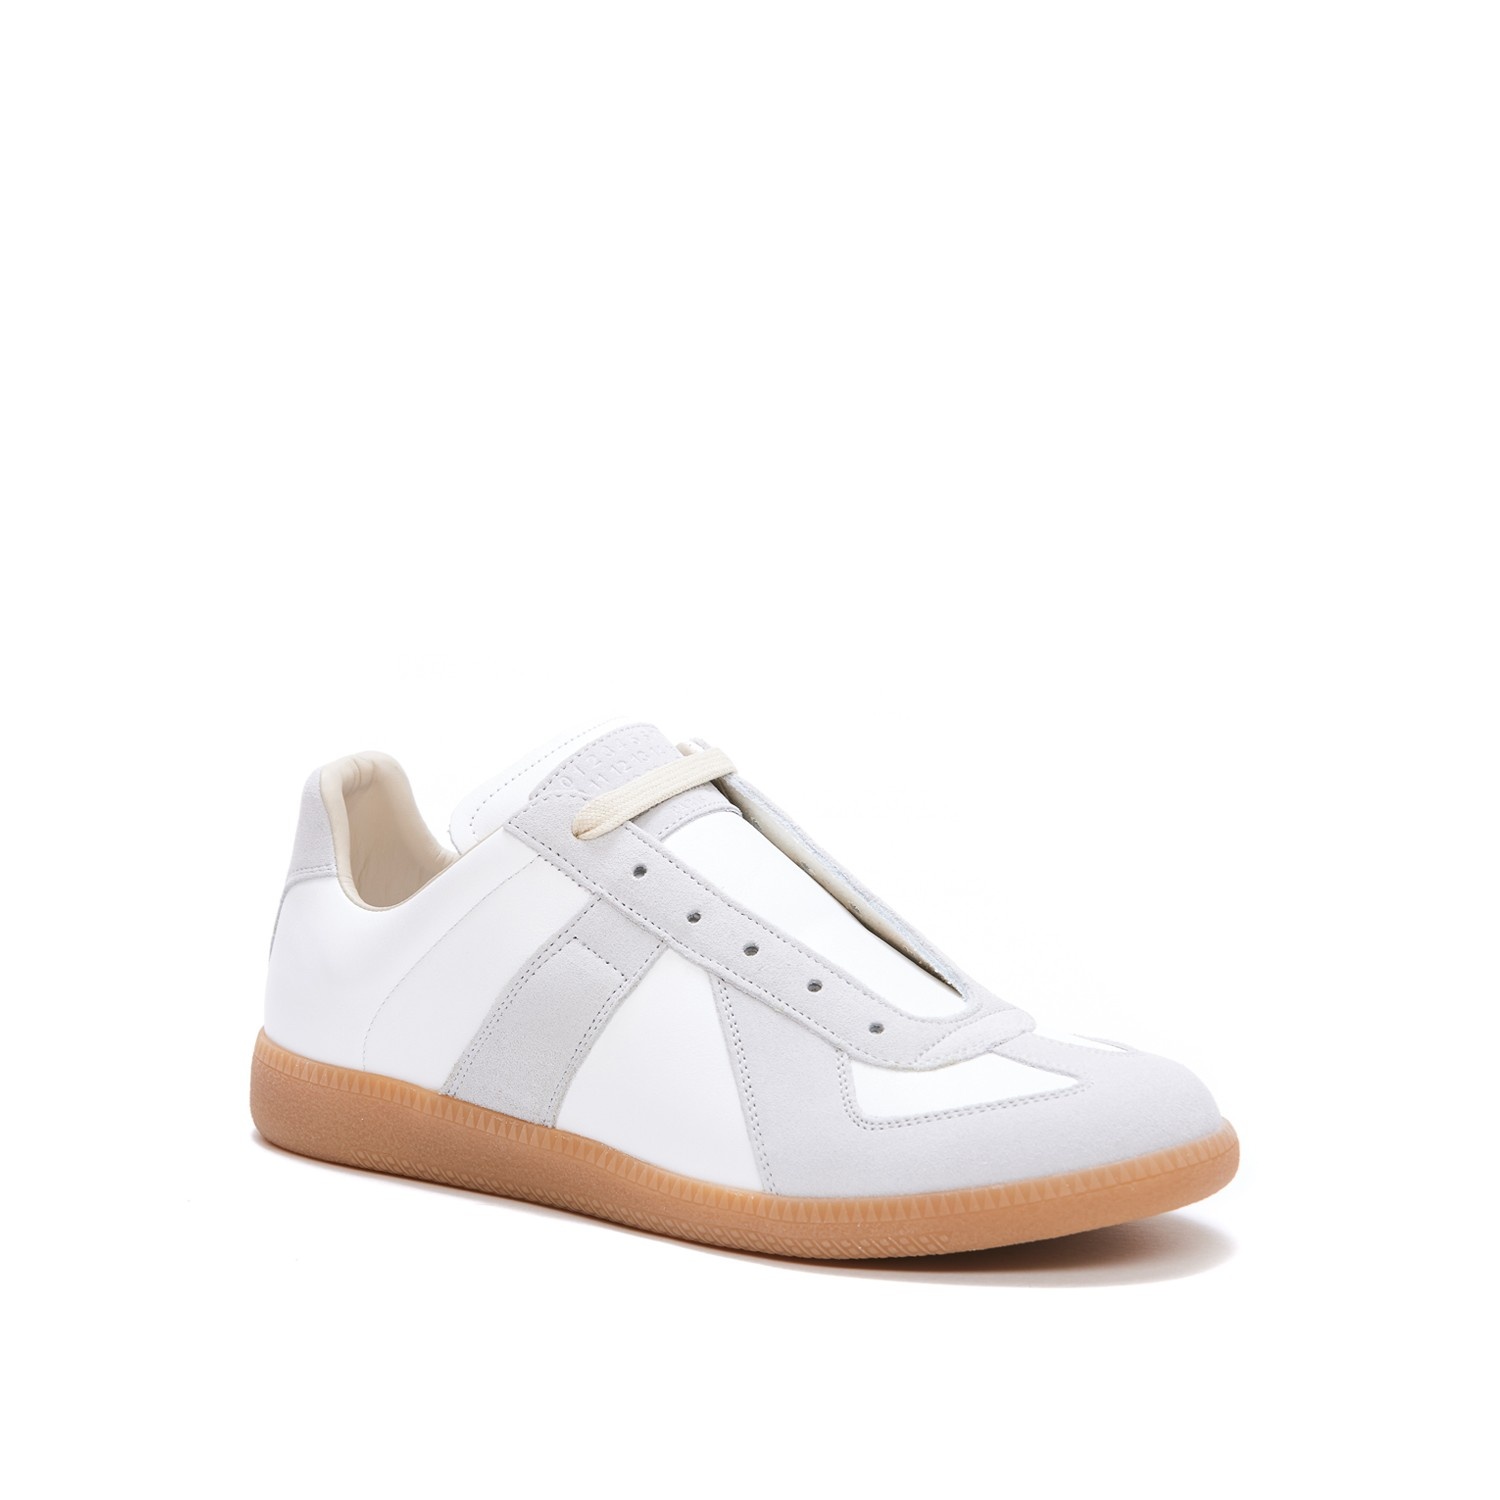 OFF WHITE LEATHER AND GREY SUEDE REPLICA SNEAKERS - 2